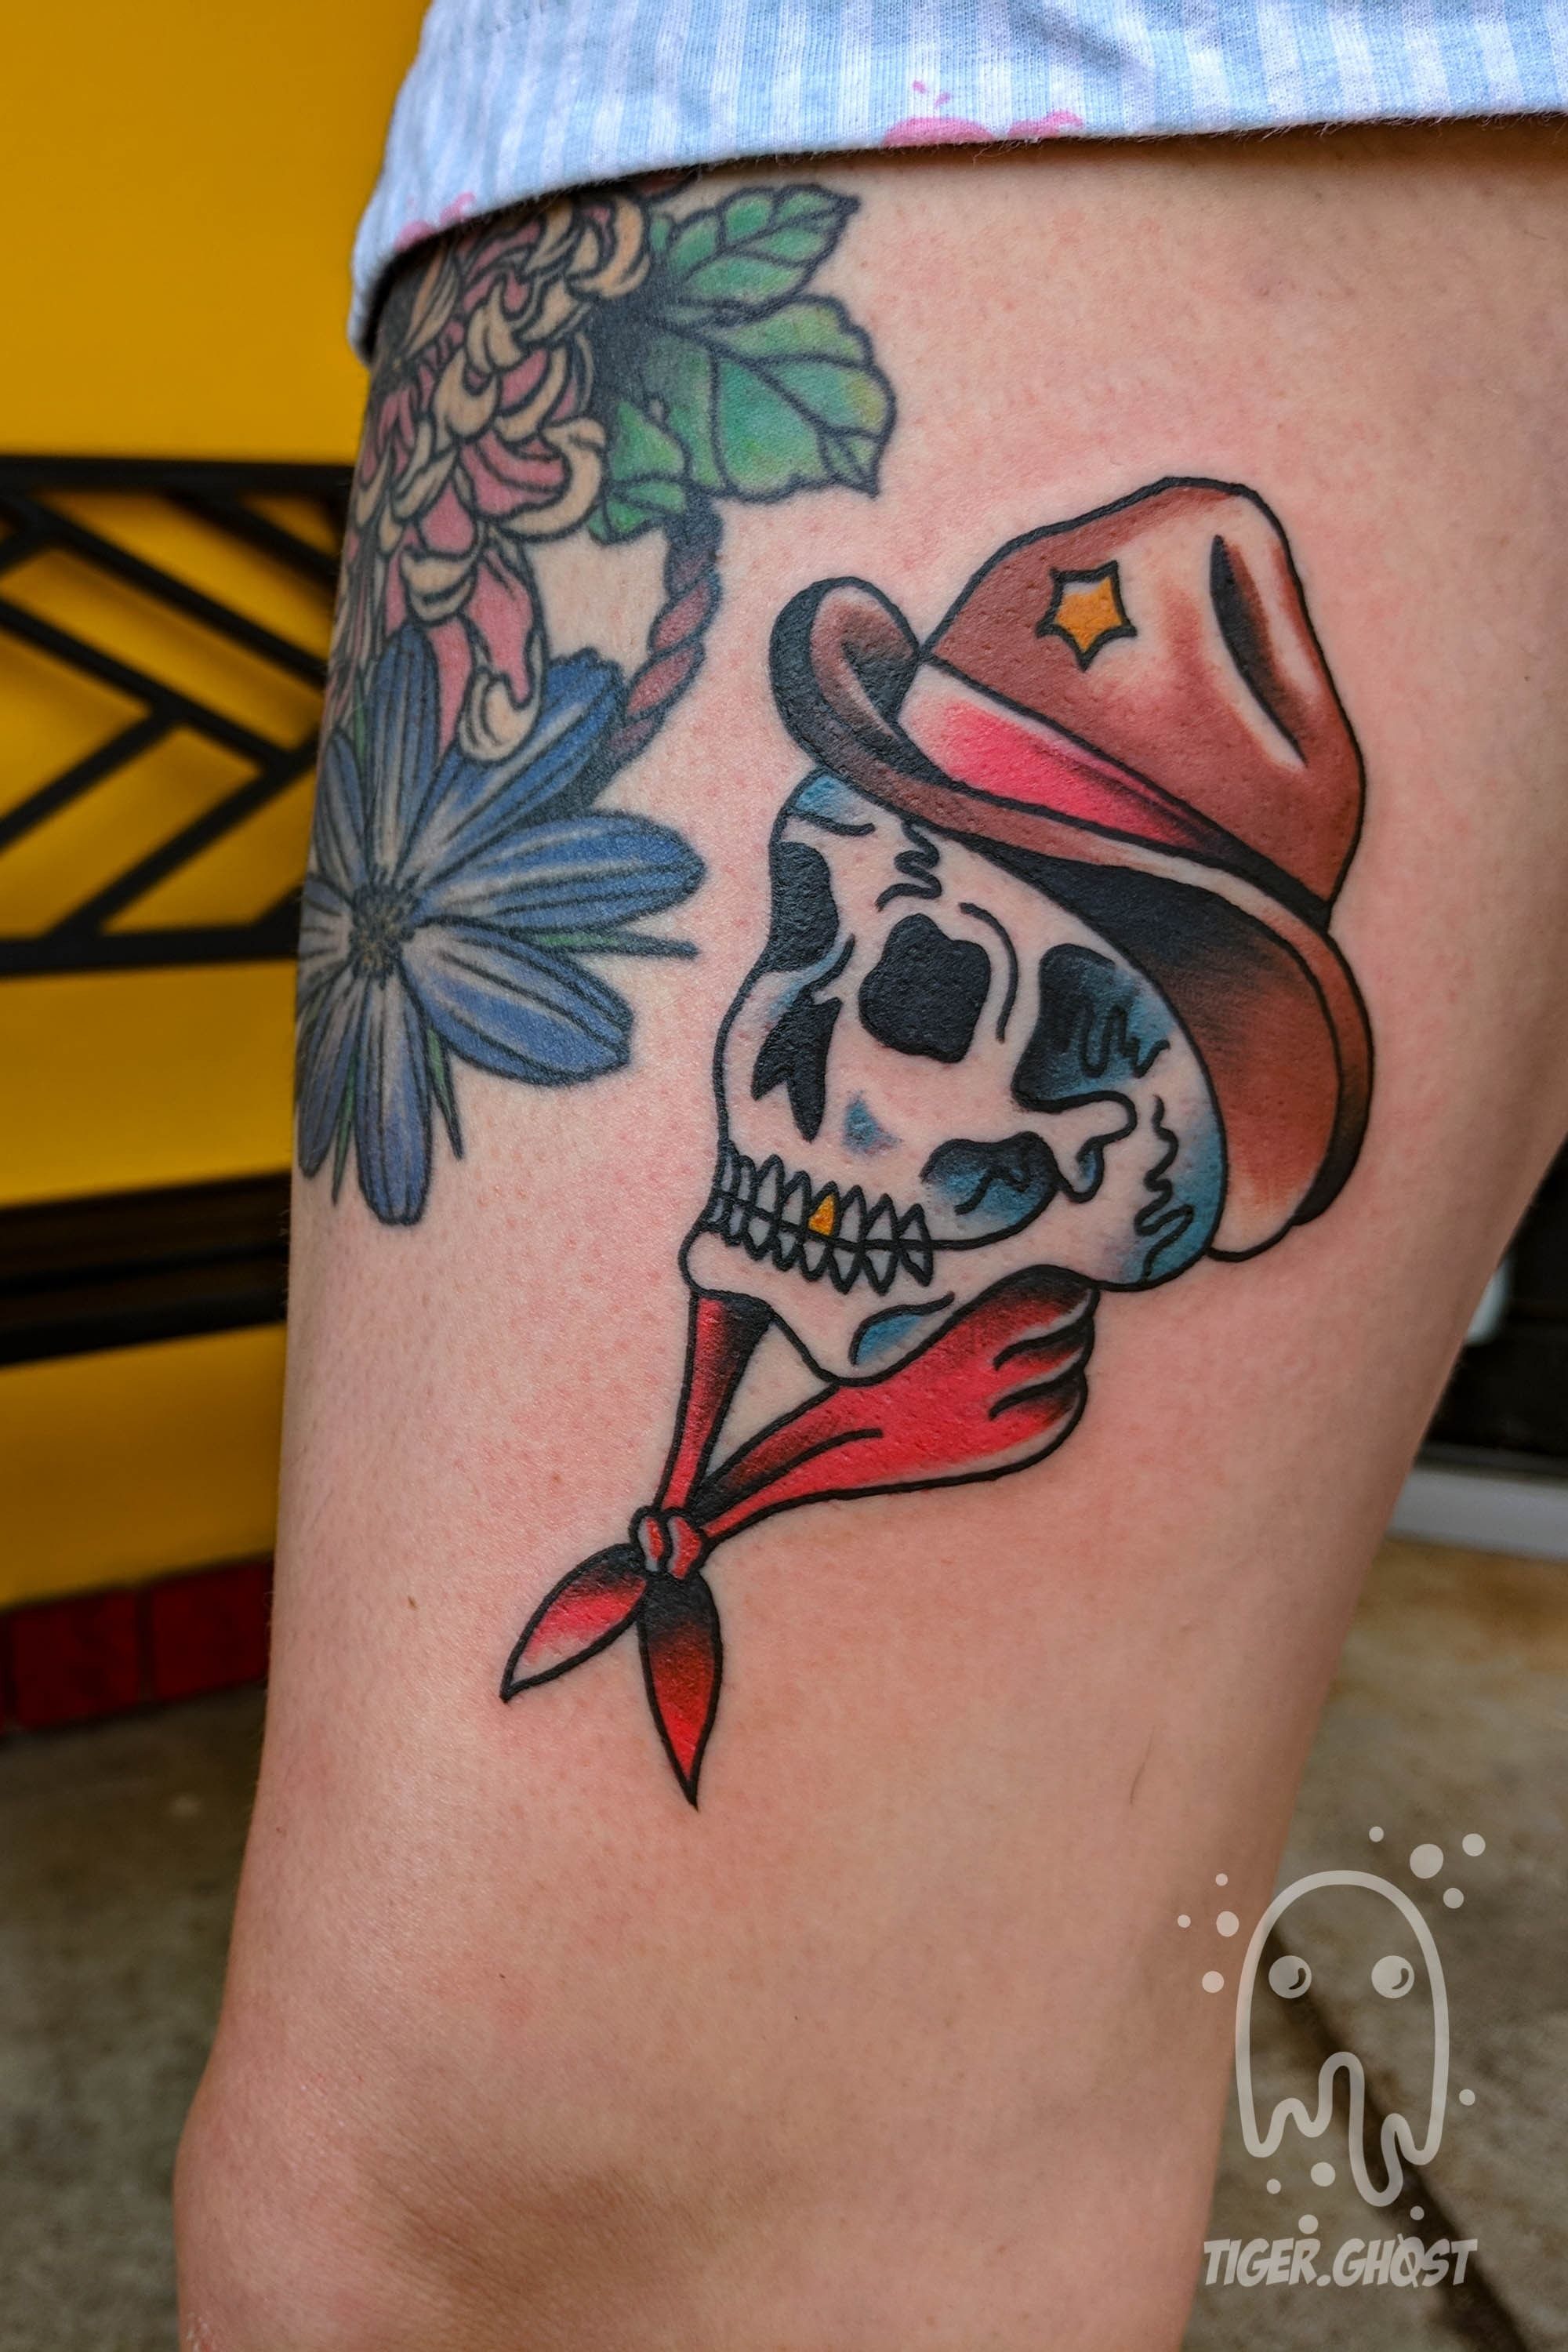 Mark 563  Healed classic cowboy skull Hit me up for more Black traditional  classics    tattoo tattoos traditionaltattooink tattooflash  traditionaltattoo traditionaltattooflash oldschooltattooflash  oldschooltattoo oldschooltattoos 